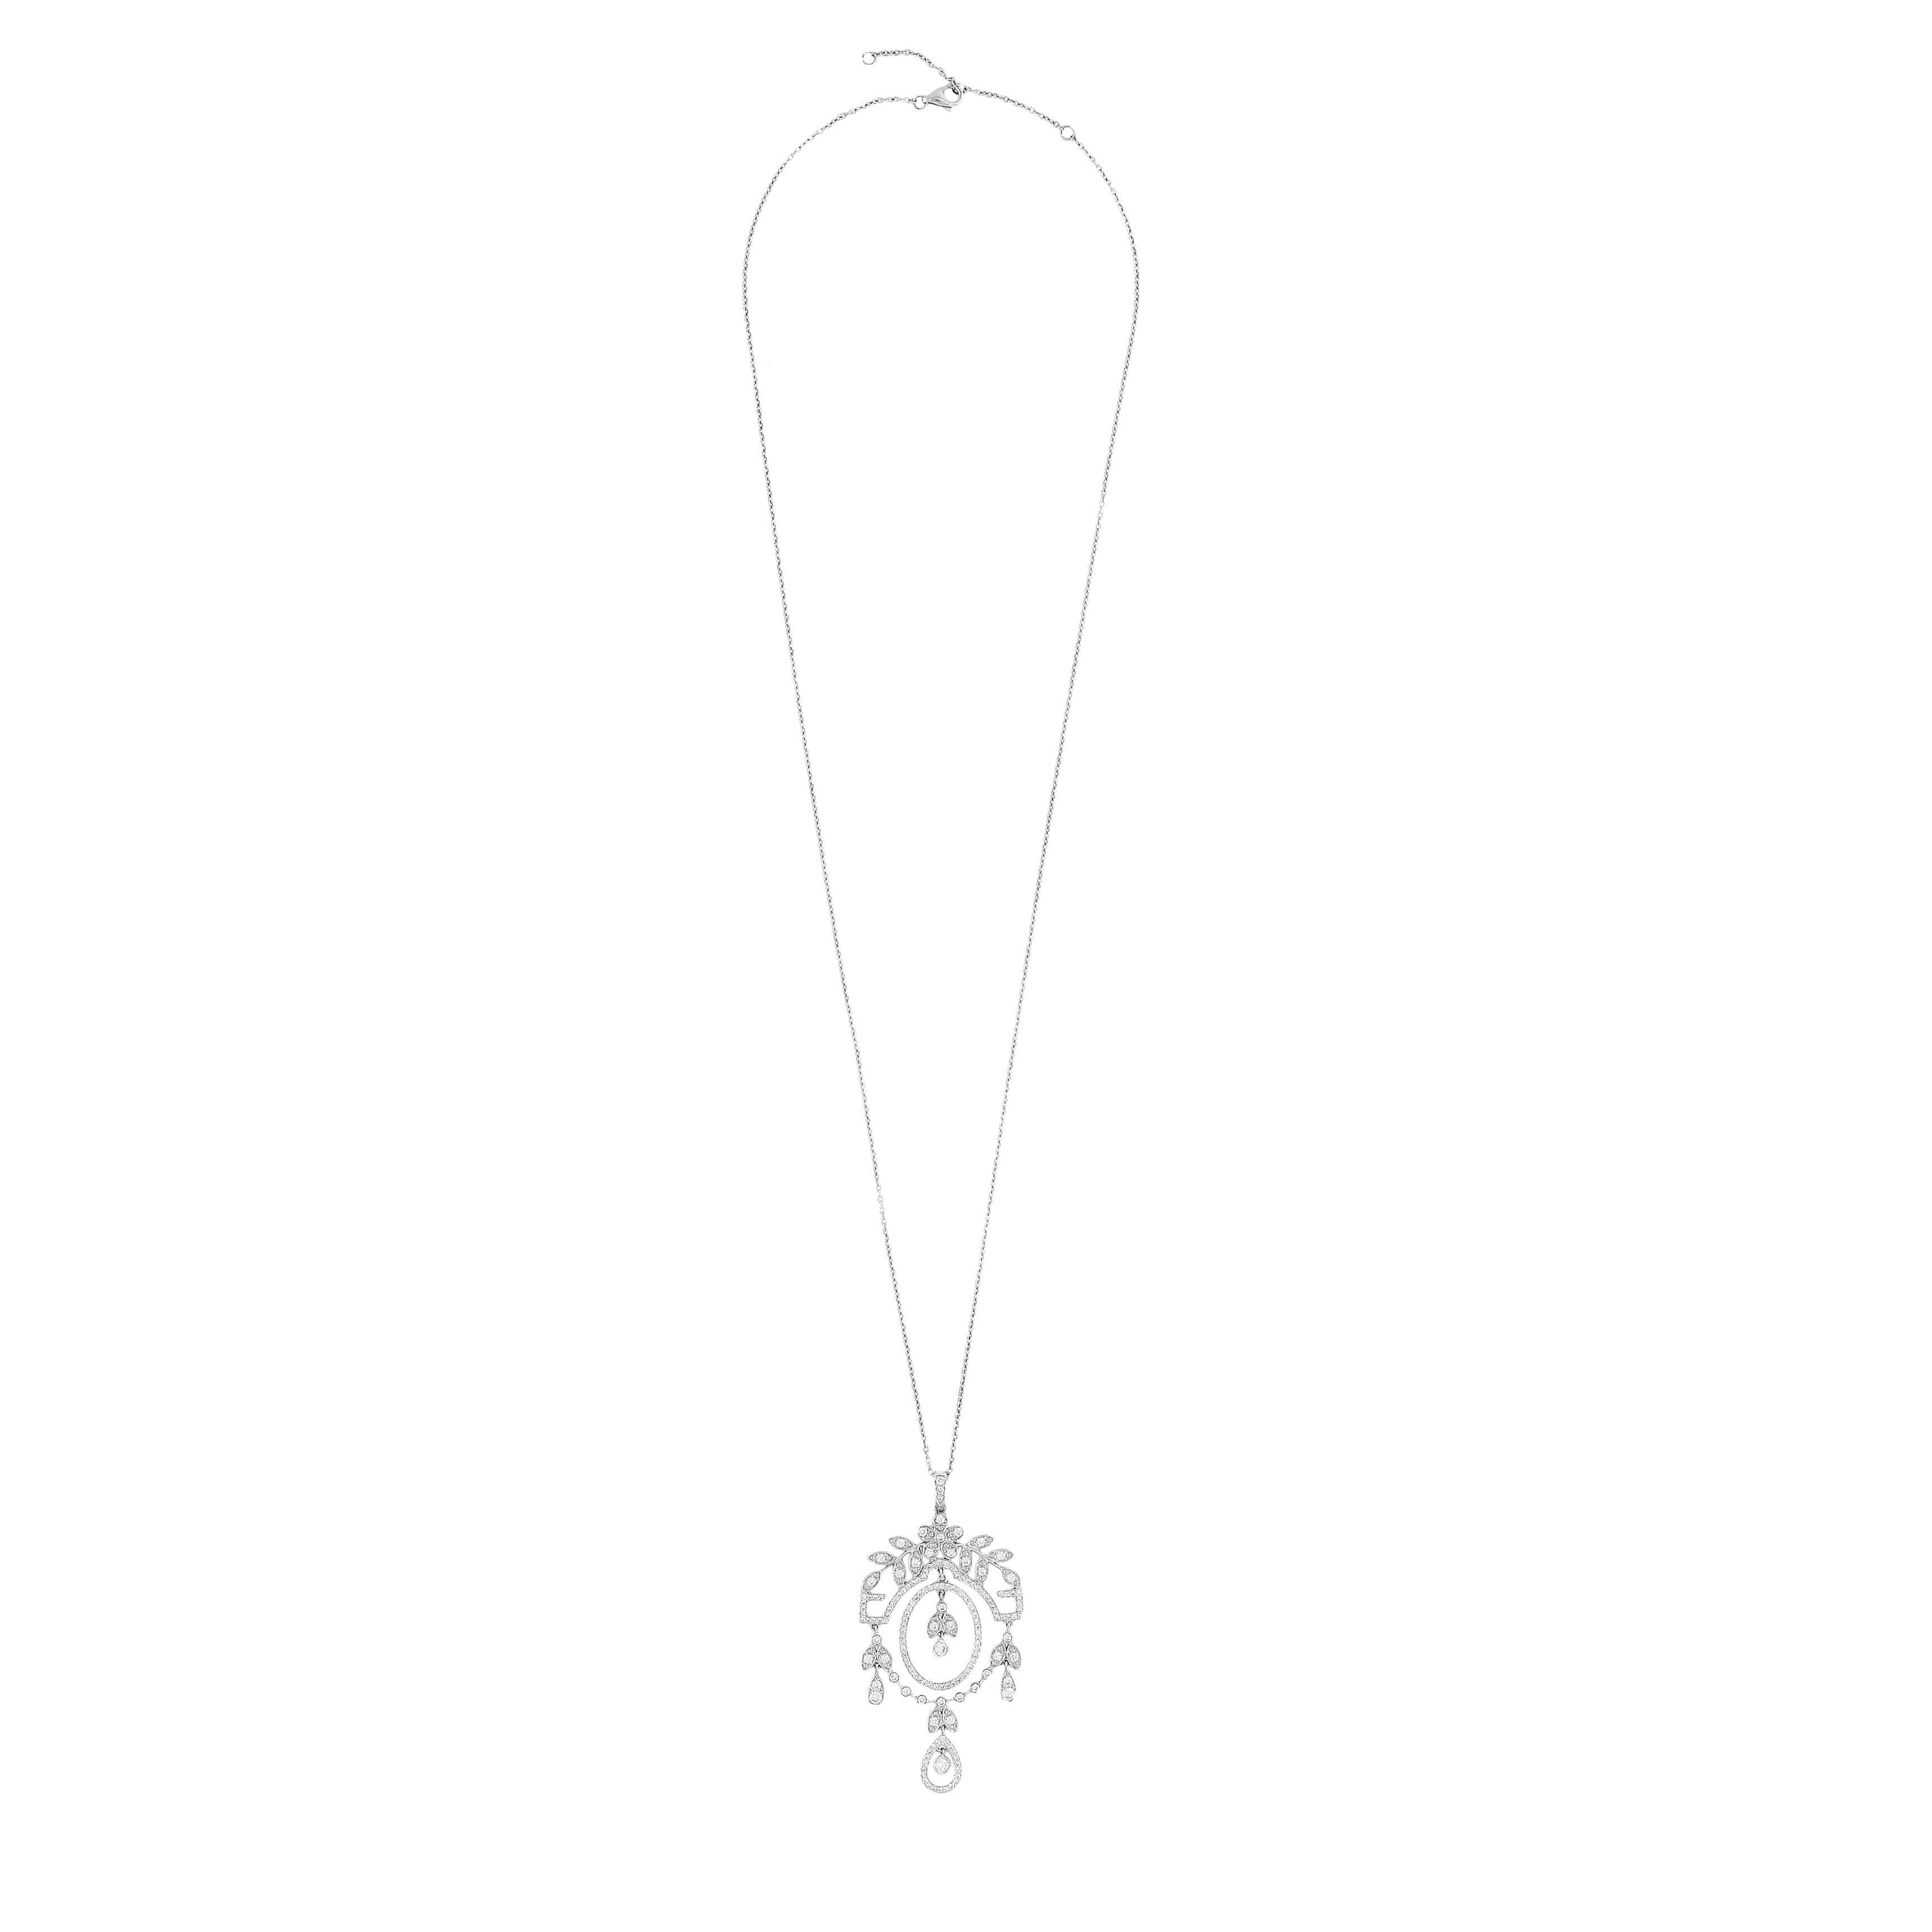 Necklace in 18K white gold 11,7gr
Diamonds 1,62ct
3 holes to fit with the length 

